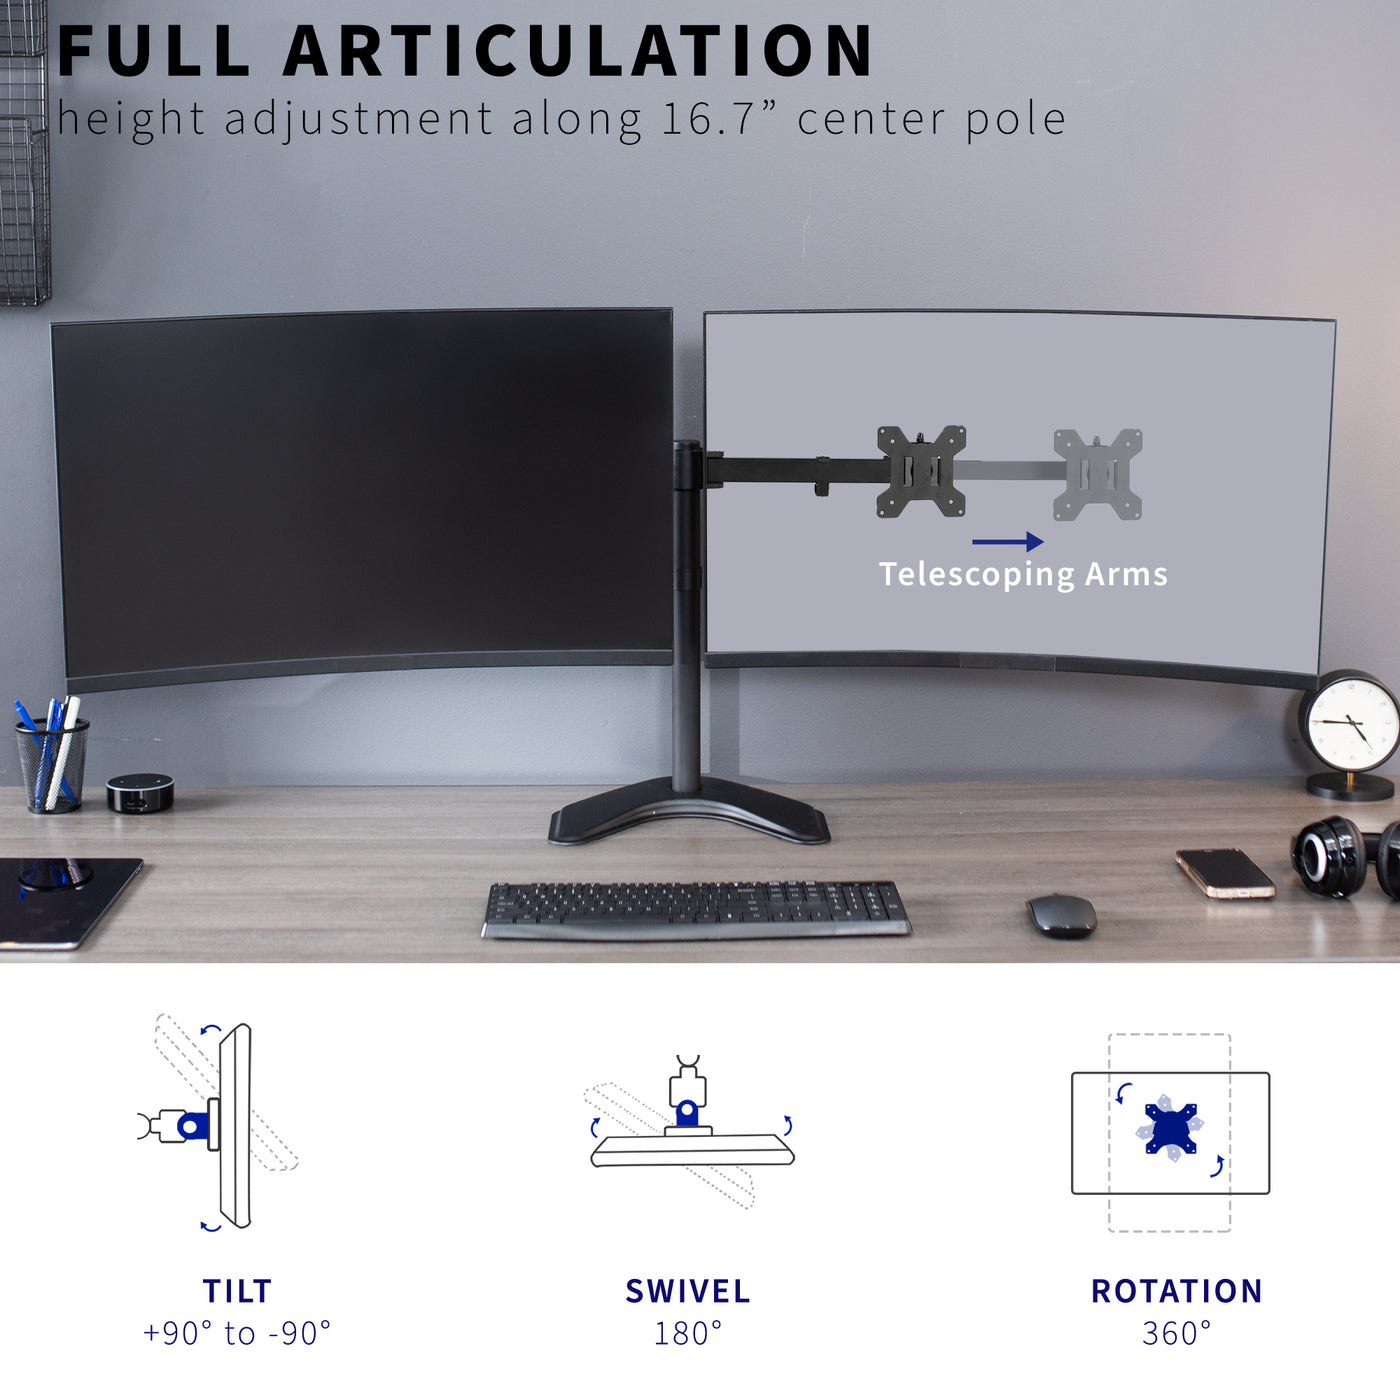 Full articulation is provided with tilt, swivel, and rotation moments to achieve the most comfortable viewing angles.